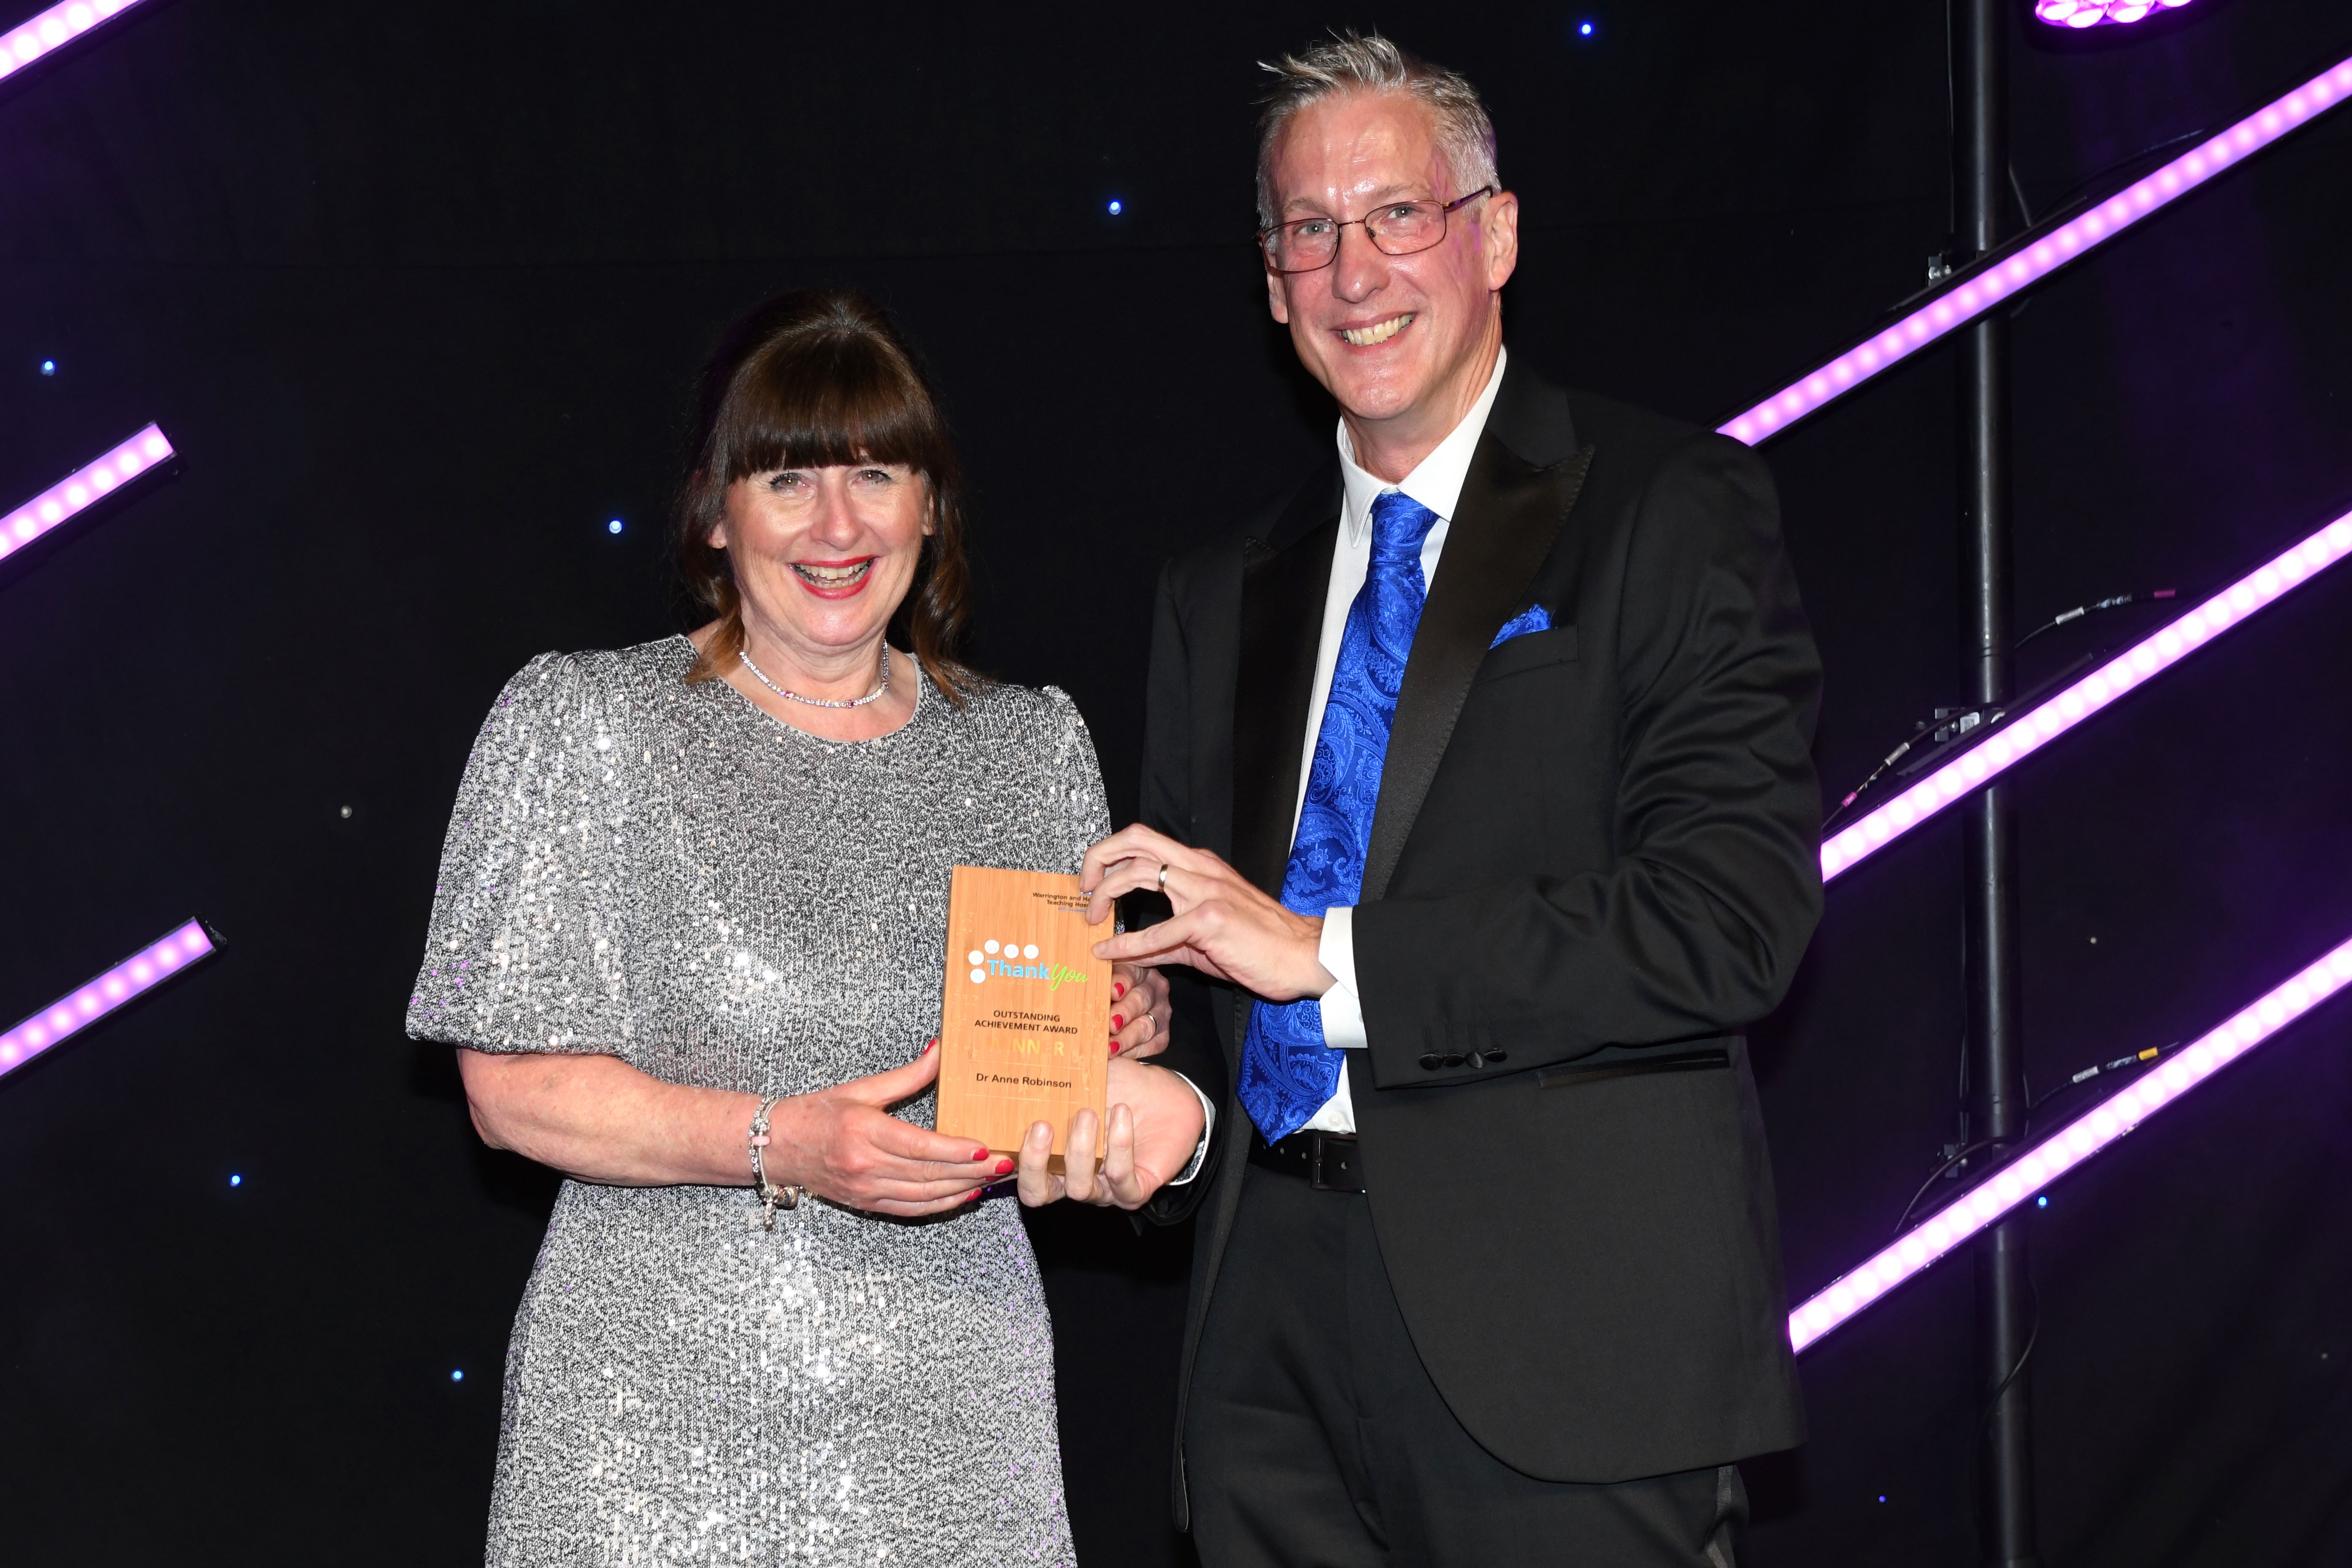 Dr Anne Robinson, Consultant in Emergency Medicine and Deputy Medical Director, was presented with an Outstanding Achievement Award by Simon Constable, Chief Executive of Warrington and Halton Teaching Hospitals NHS Foundation Trust